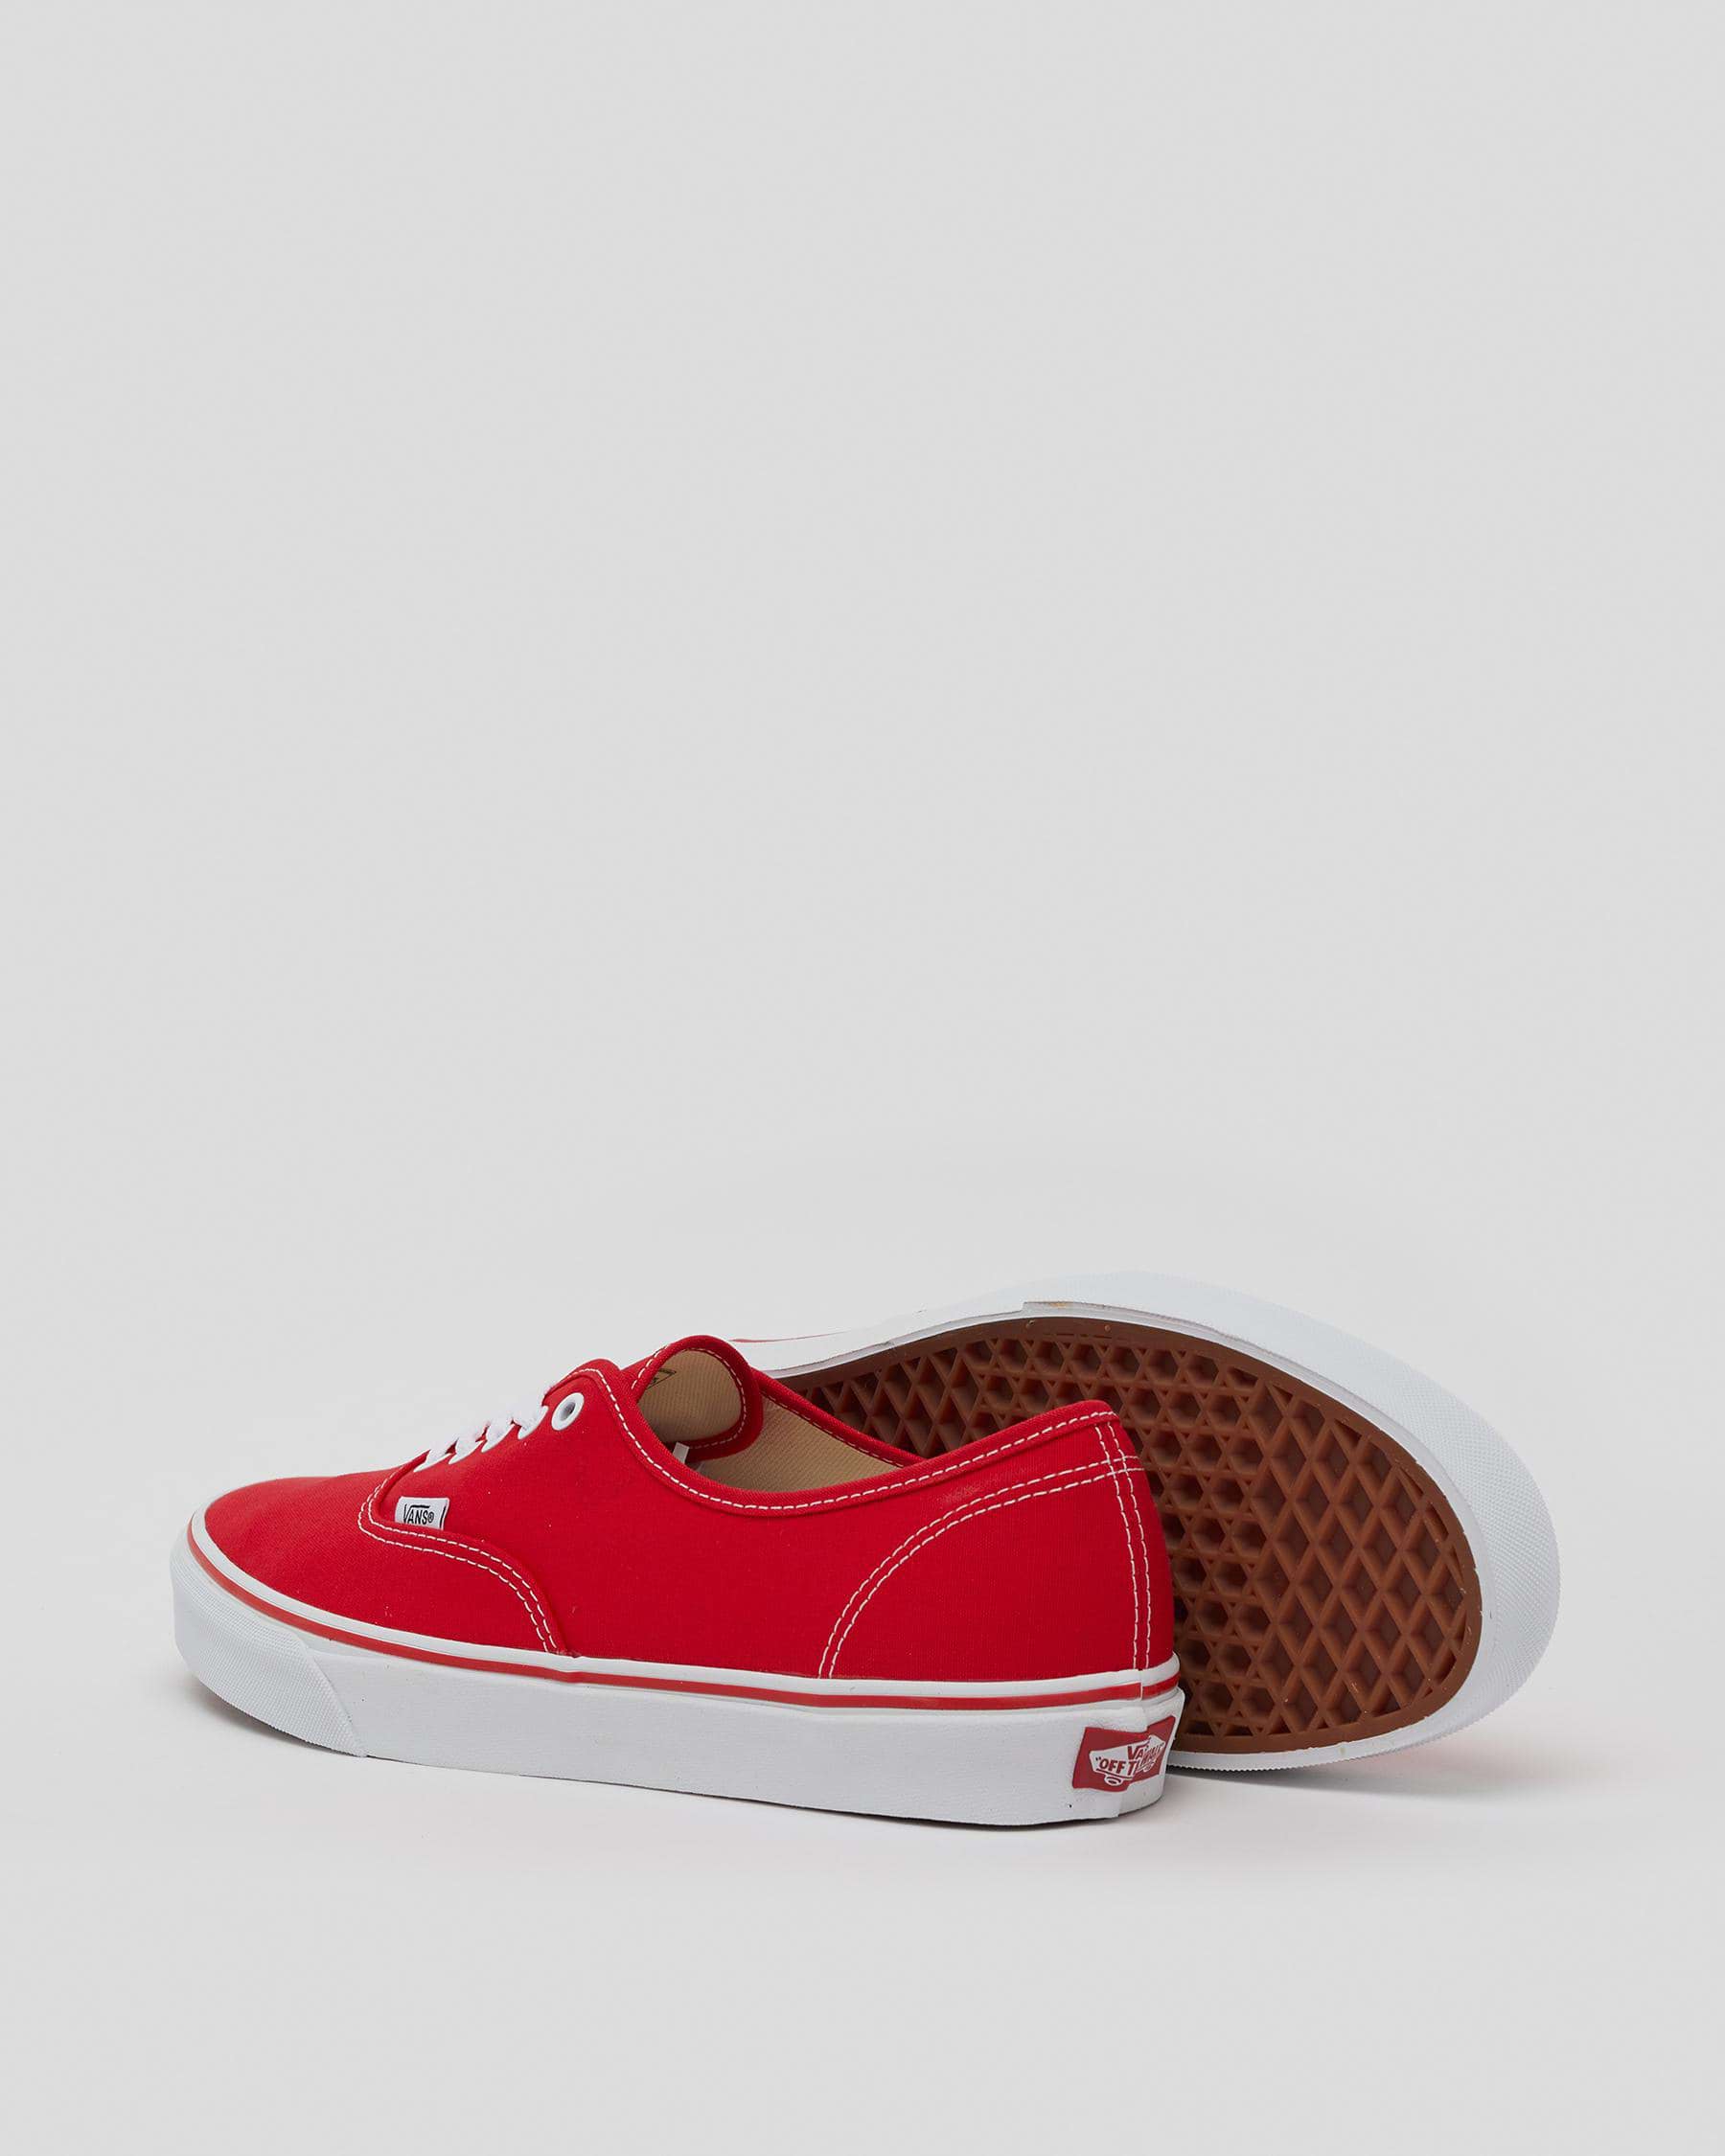 Vans Authentic Shoes In Red - Fast Shipping & Easy Returns - City Beach ...